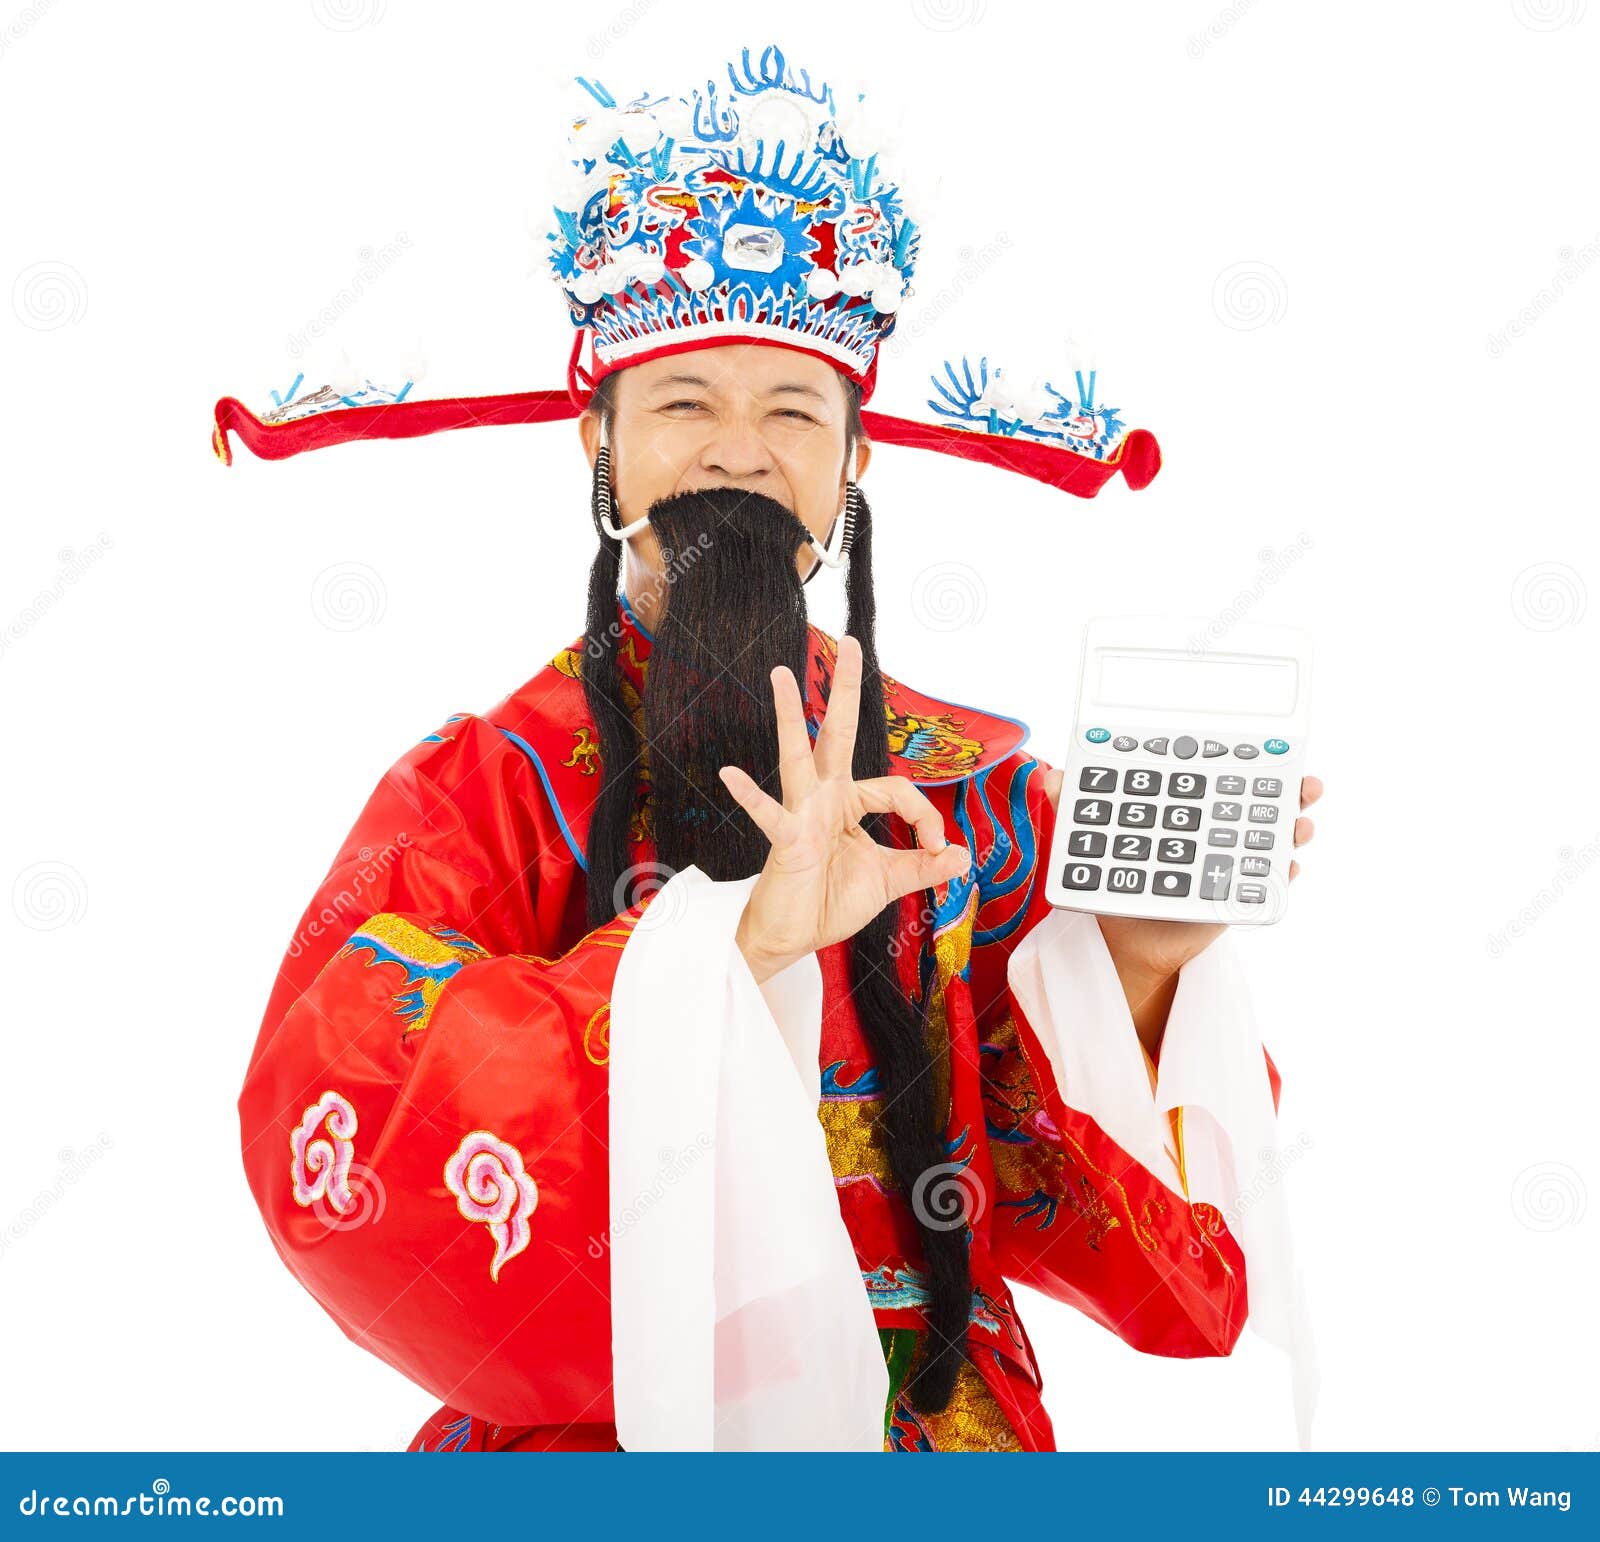 god of wealth holding a compute machine